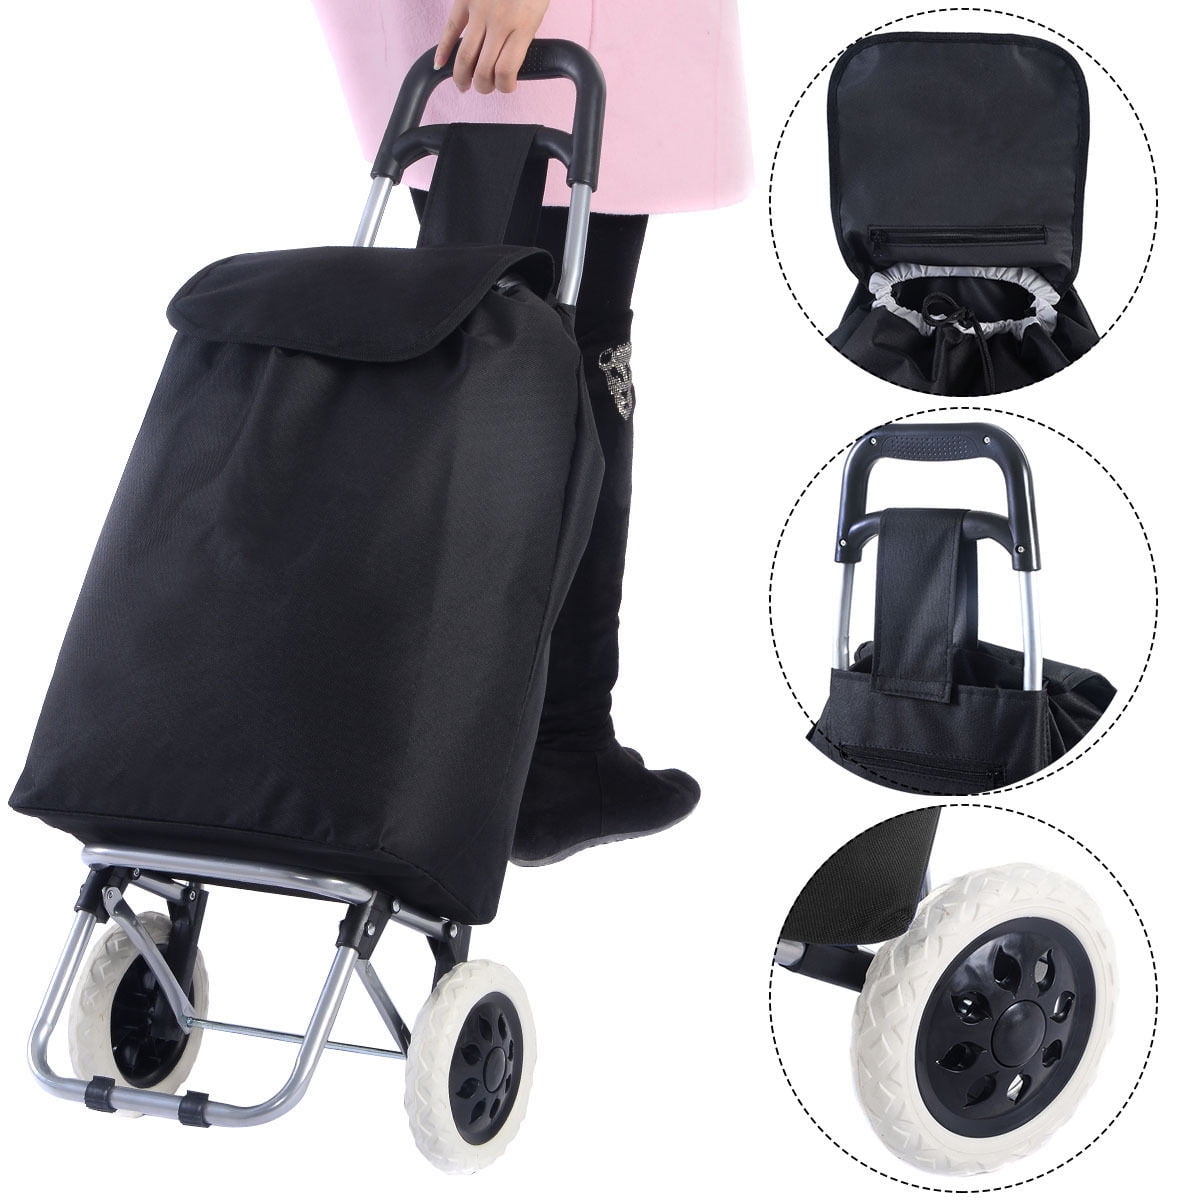 NEW LIGHT WEIGHT LARGE FOLDING SHOPPING TROLLEY FESTIVAL BAG ON WHEELS 67ltr 